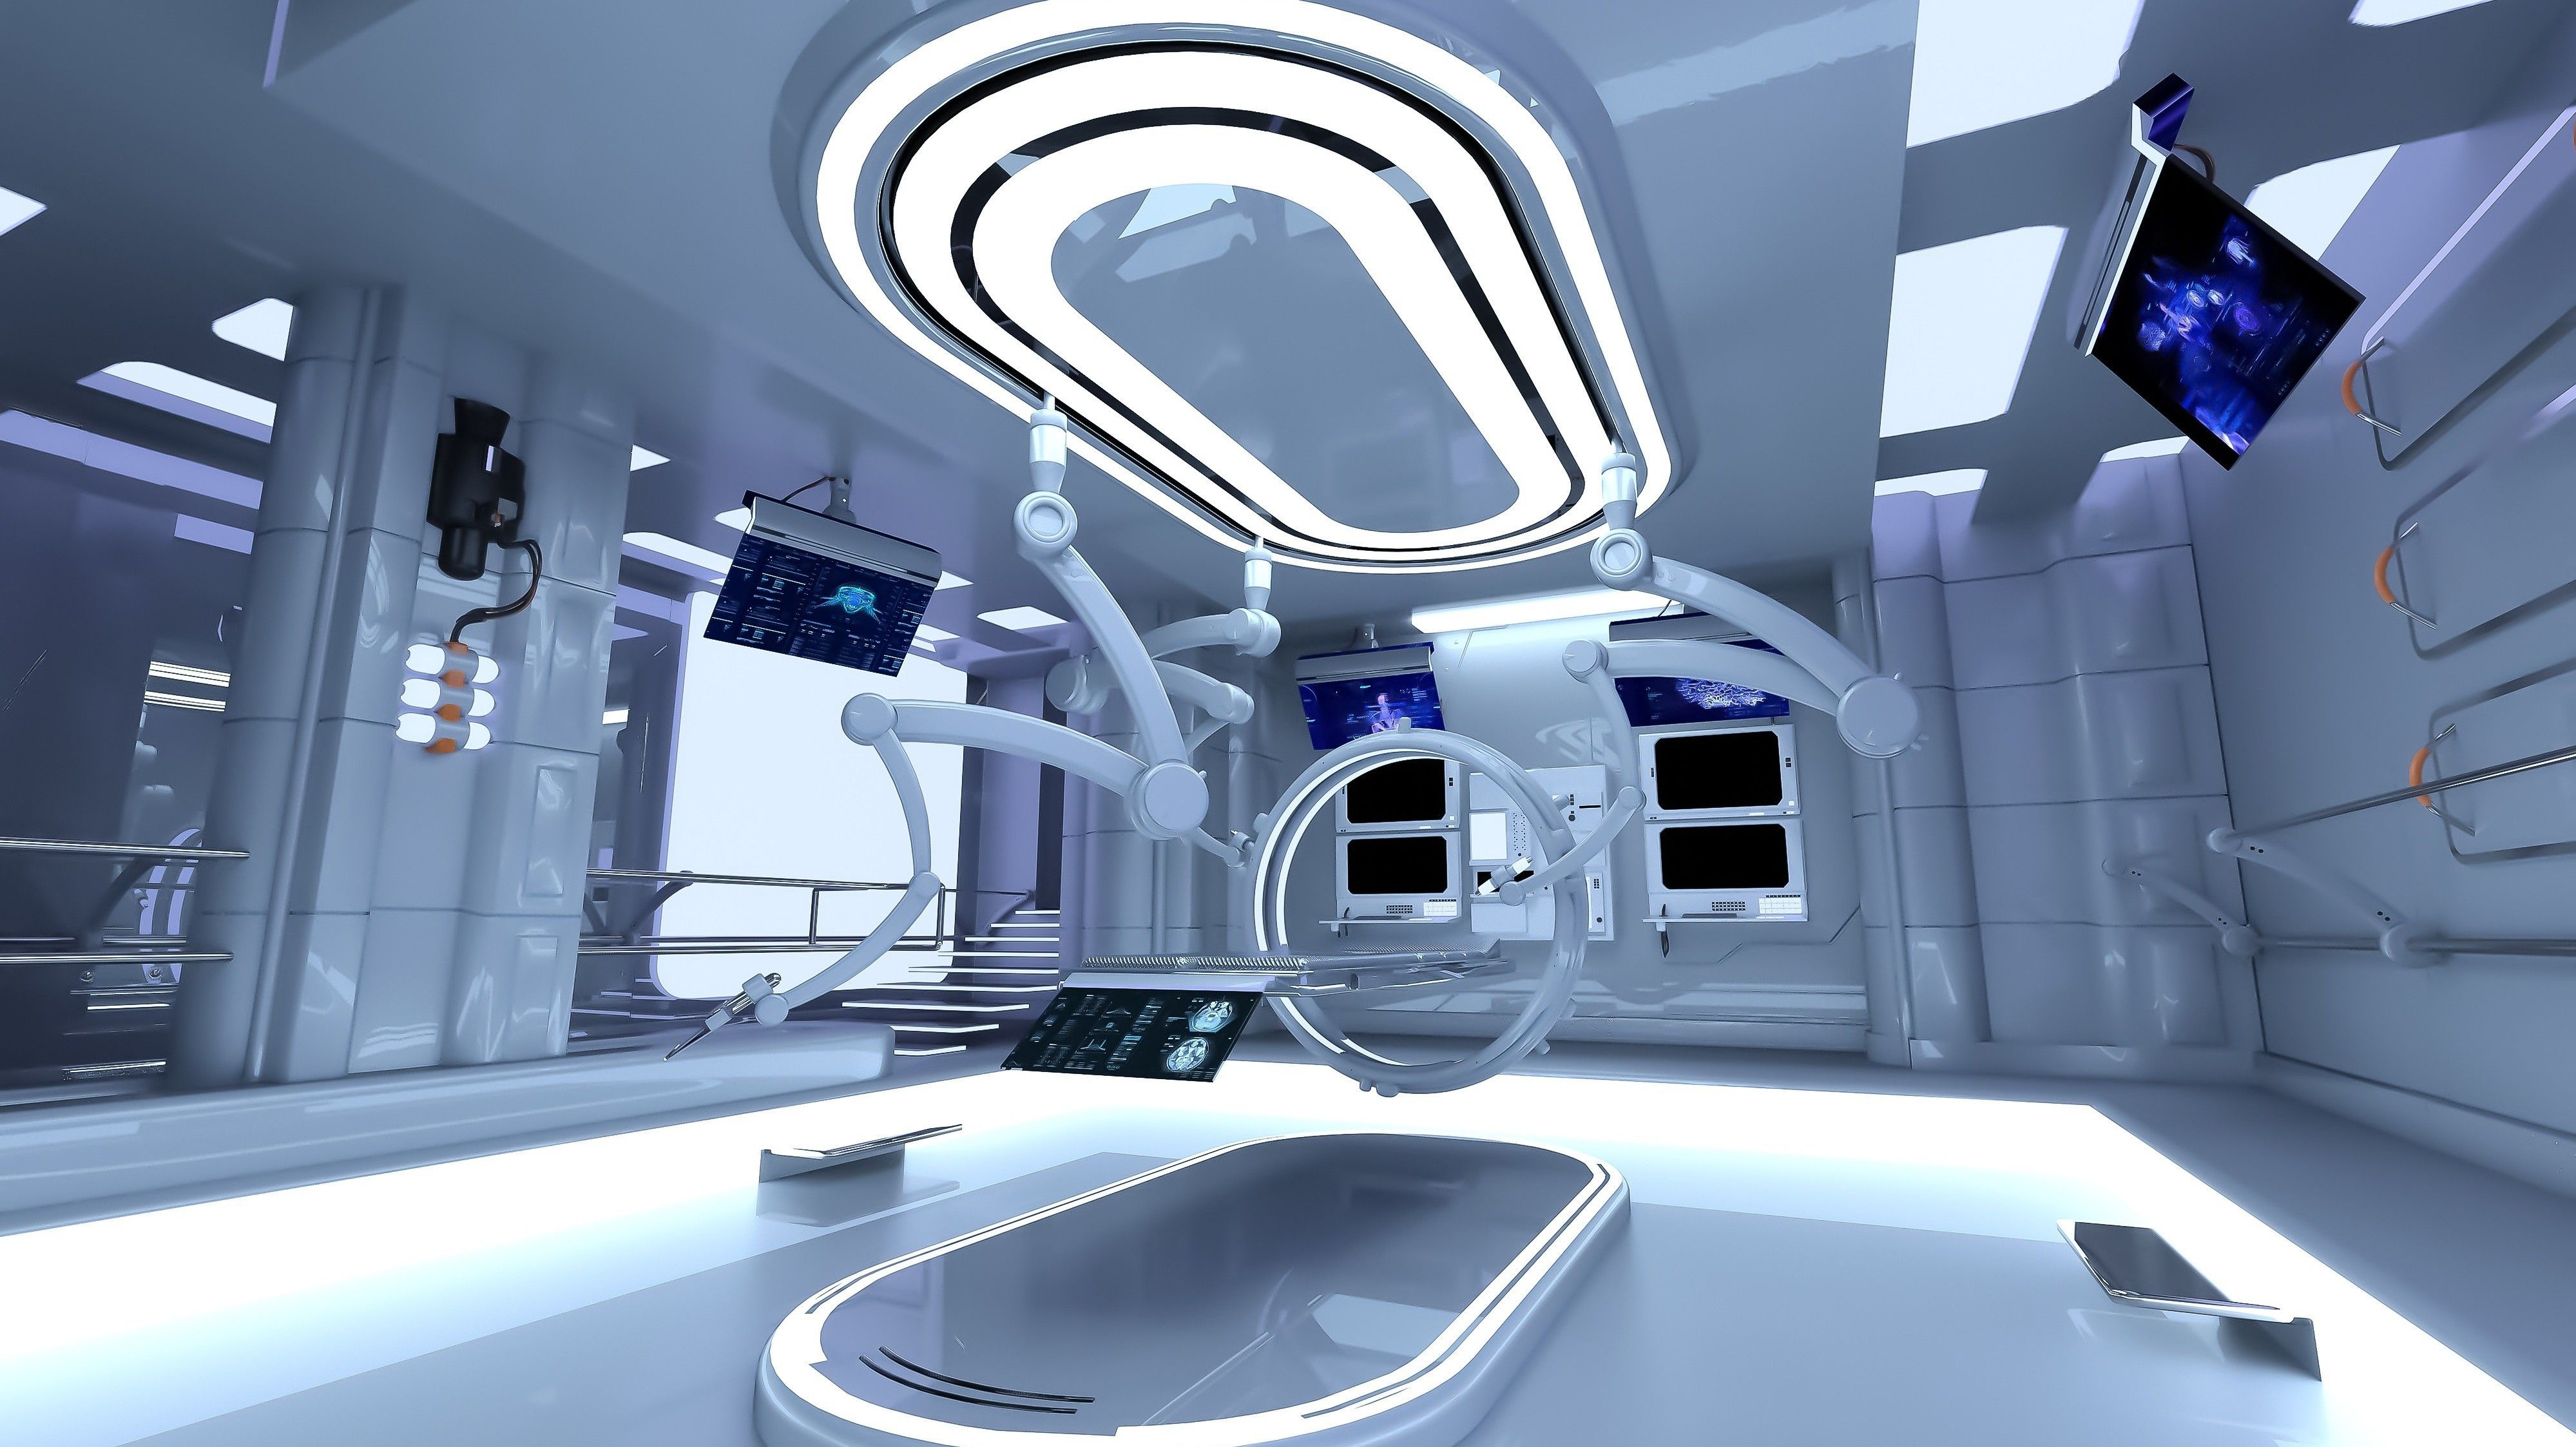 Render of a science fiction operating room